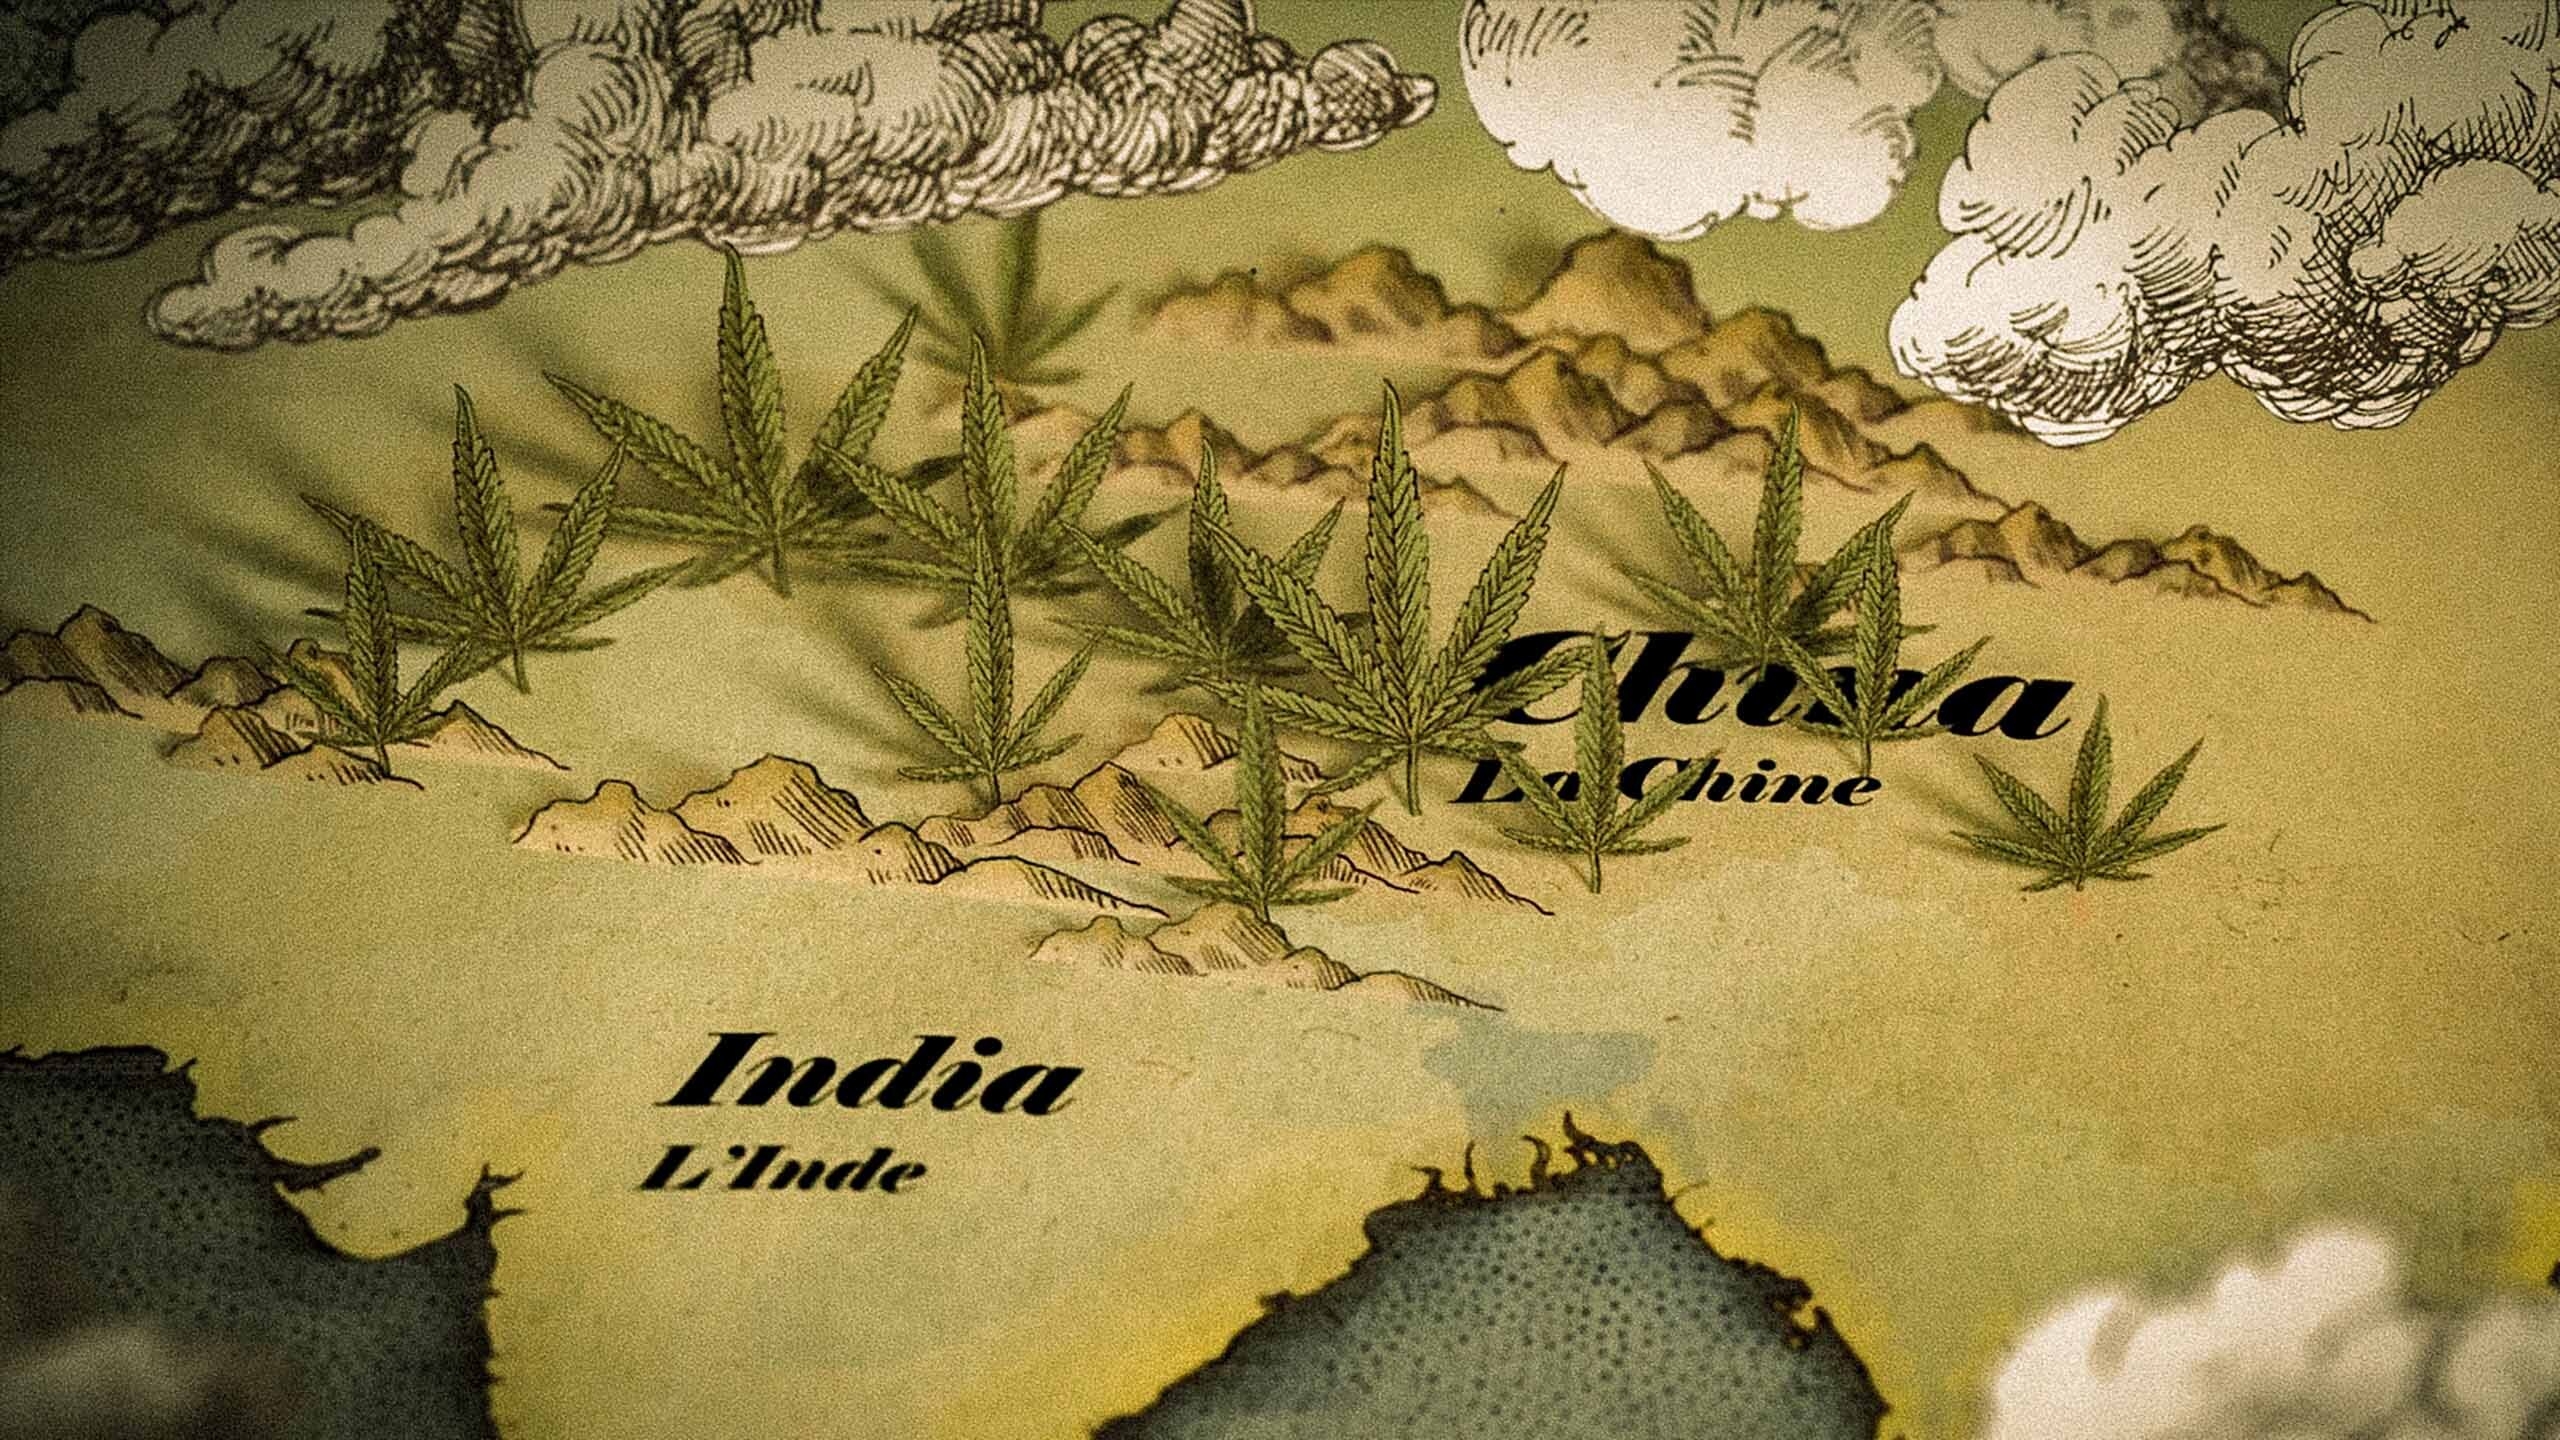 complete world history cannabis